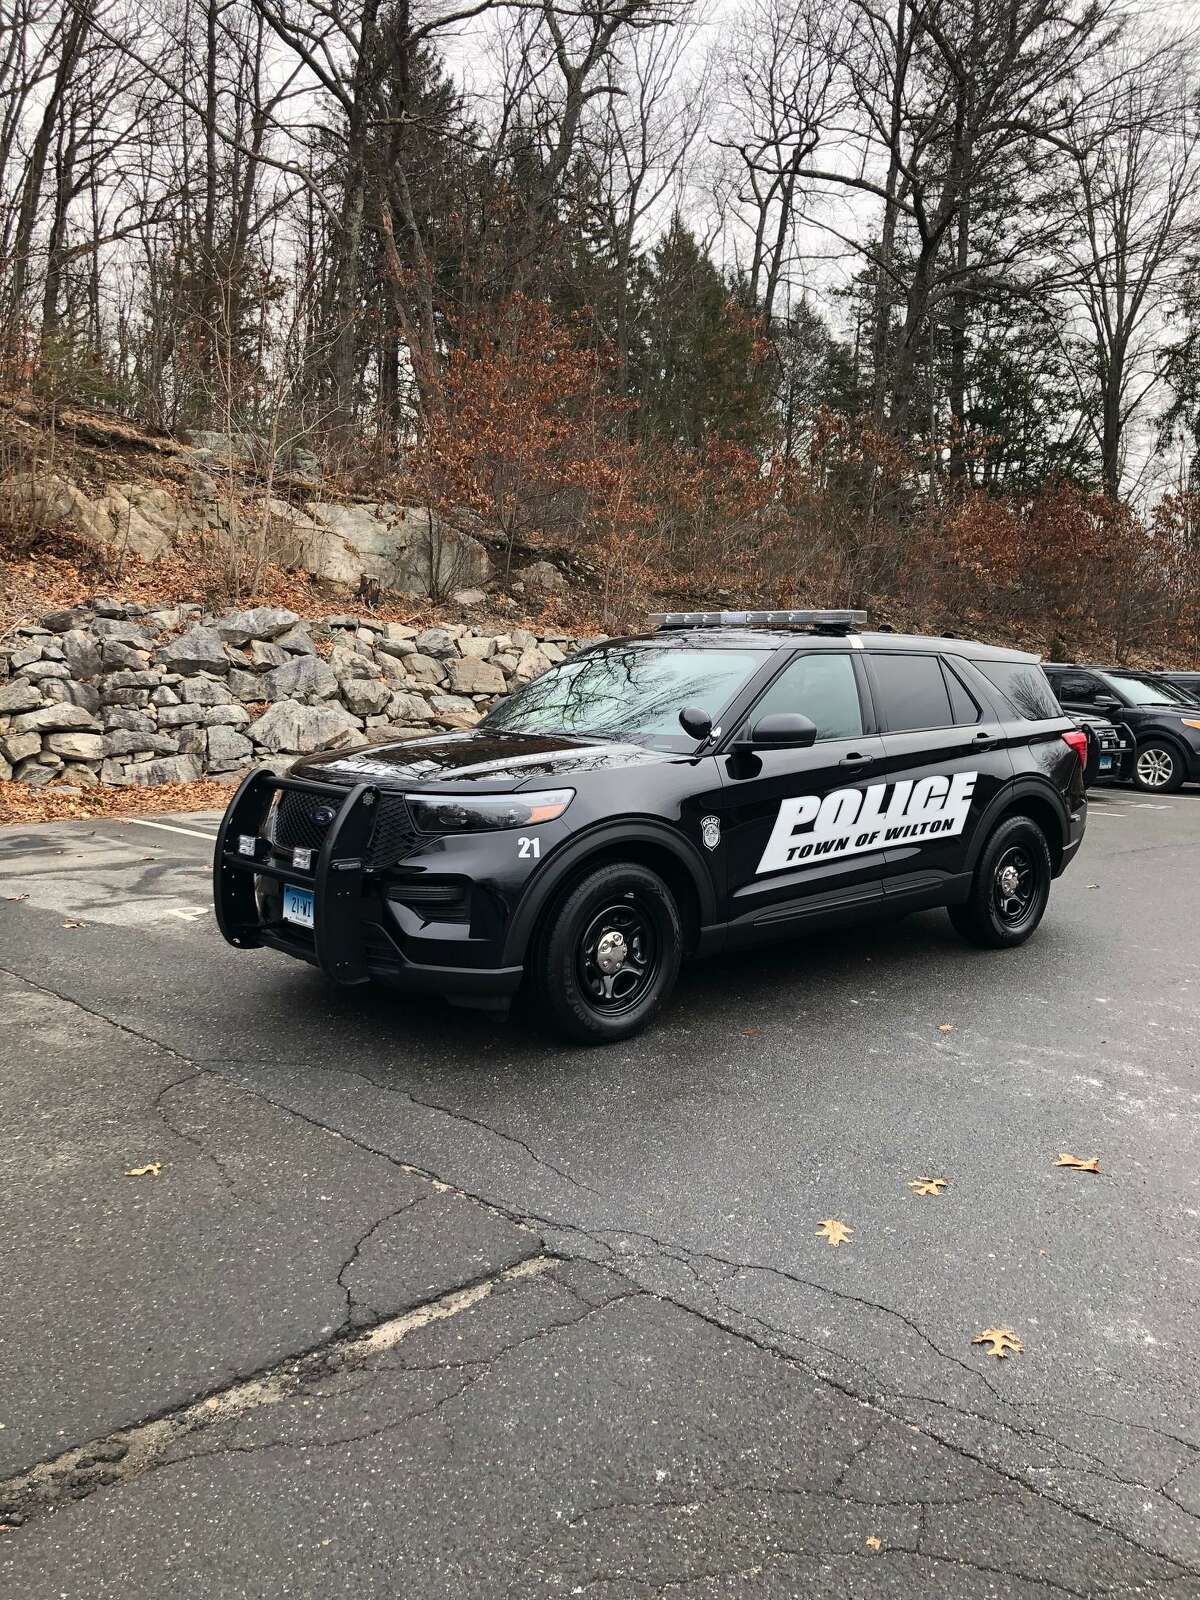 Wilton Police said the false alarm of a shooting Friday night was a “swatting” incident, where someone fakes a local number to report an excessively violent crime in order to get a large police reaction. The investigation remains open.